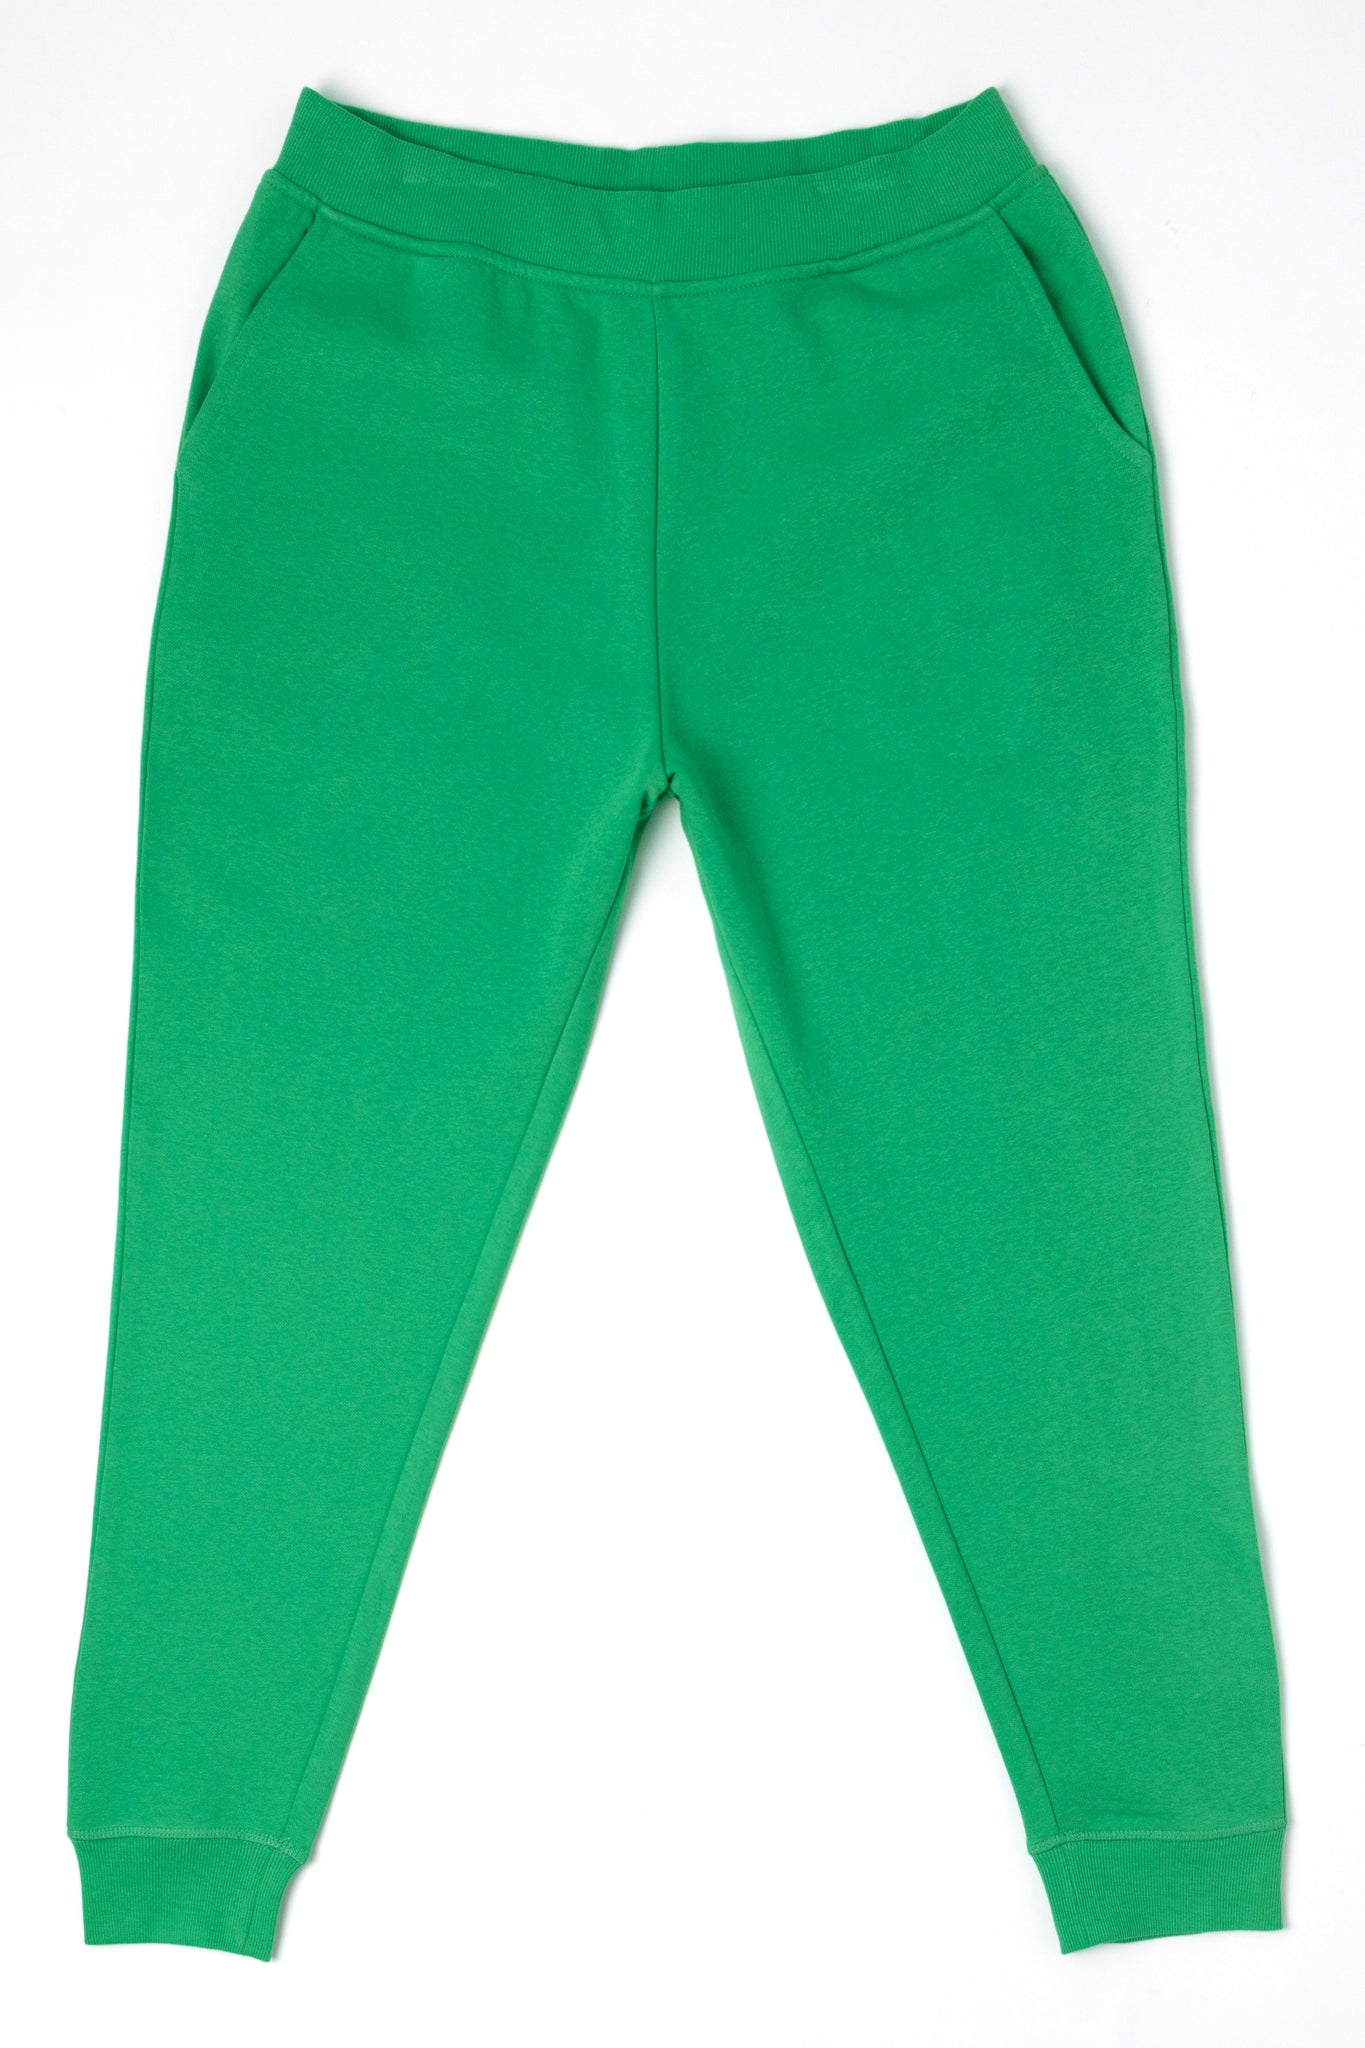 HERO - 5020R Unisex Joggers - Kelly Green (Relaxed Fit)